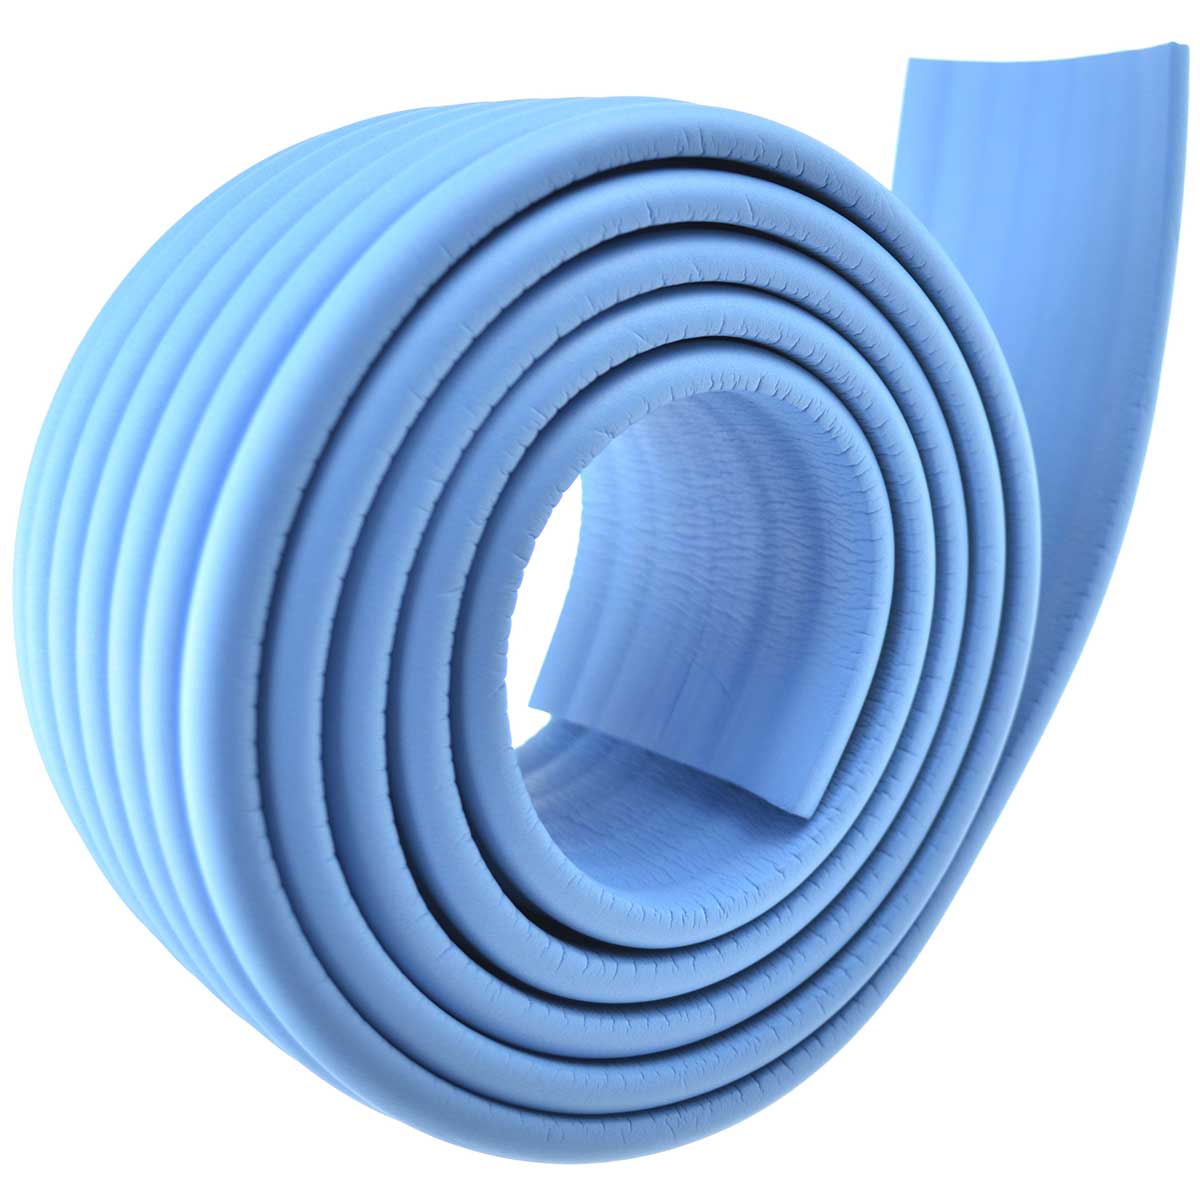 1 Roll Skyblue Multi-Purpose Edge Protector 78.7 inches (2 meters)